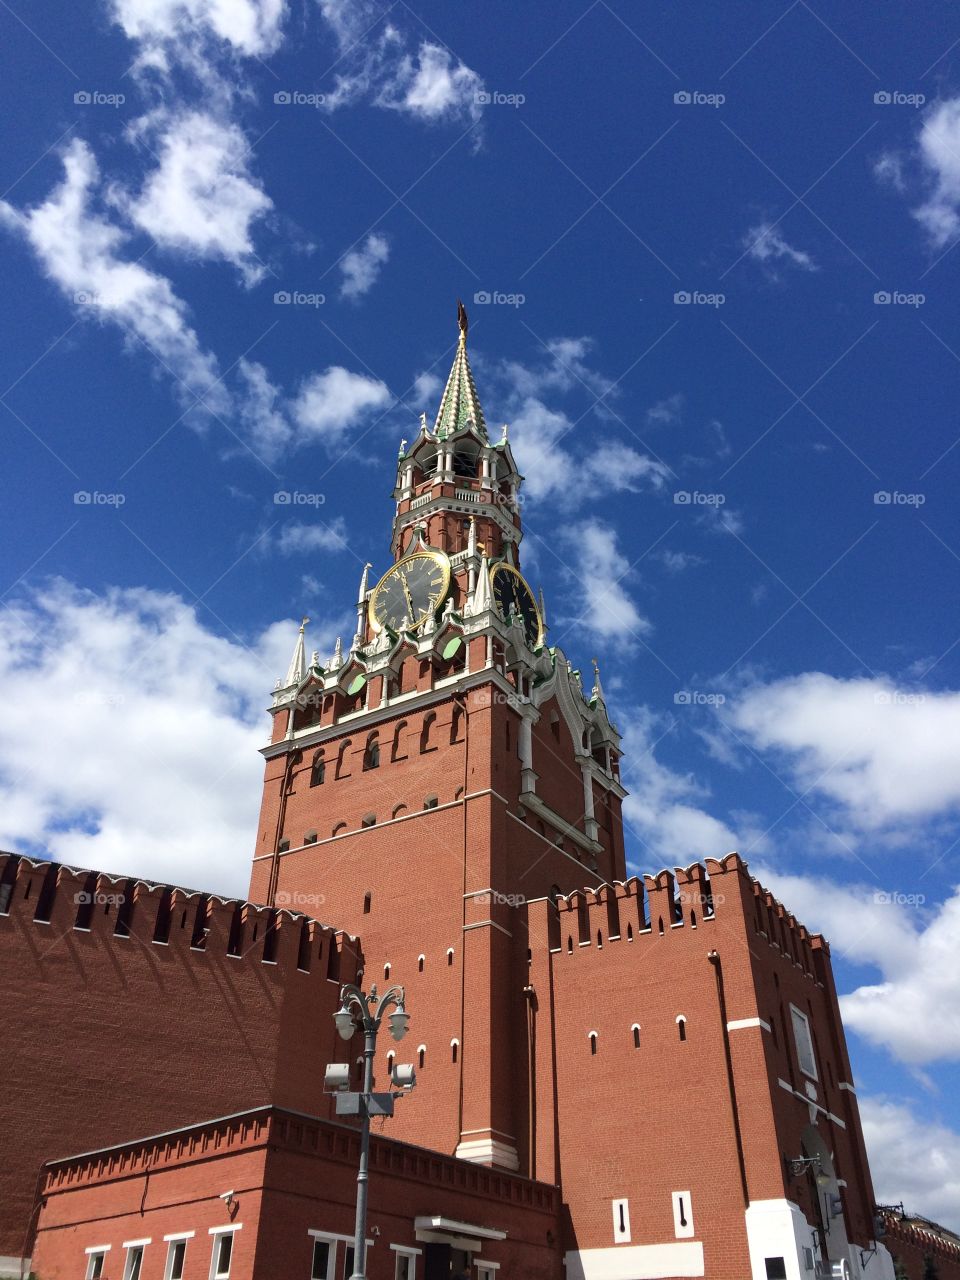 Clock tower on Red Square in Moscow, Russia